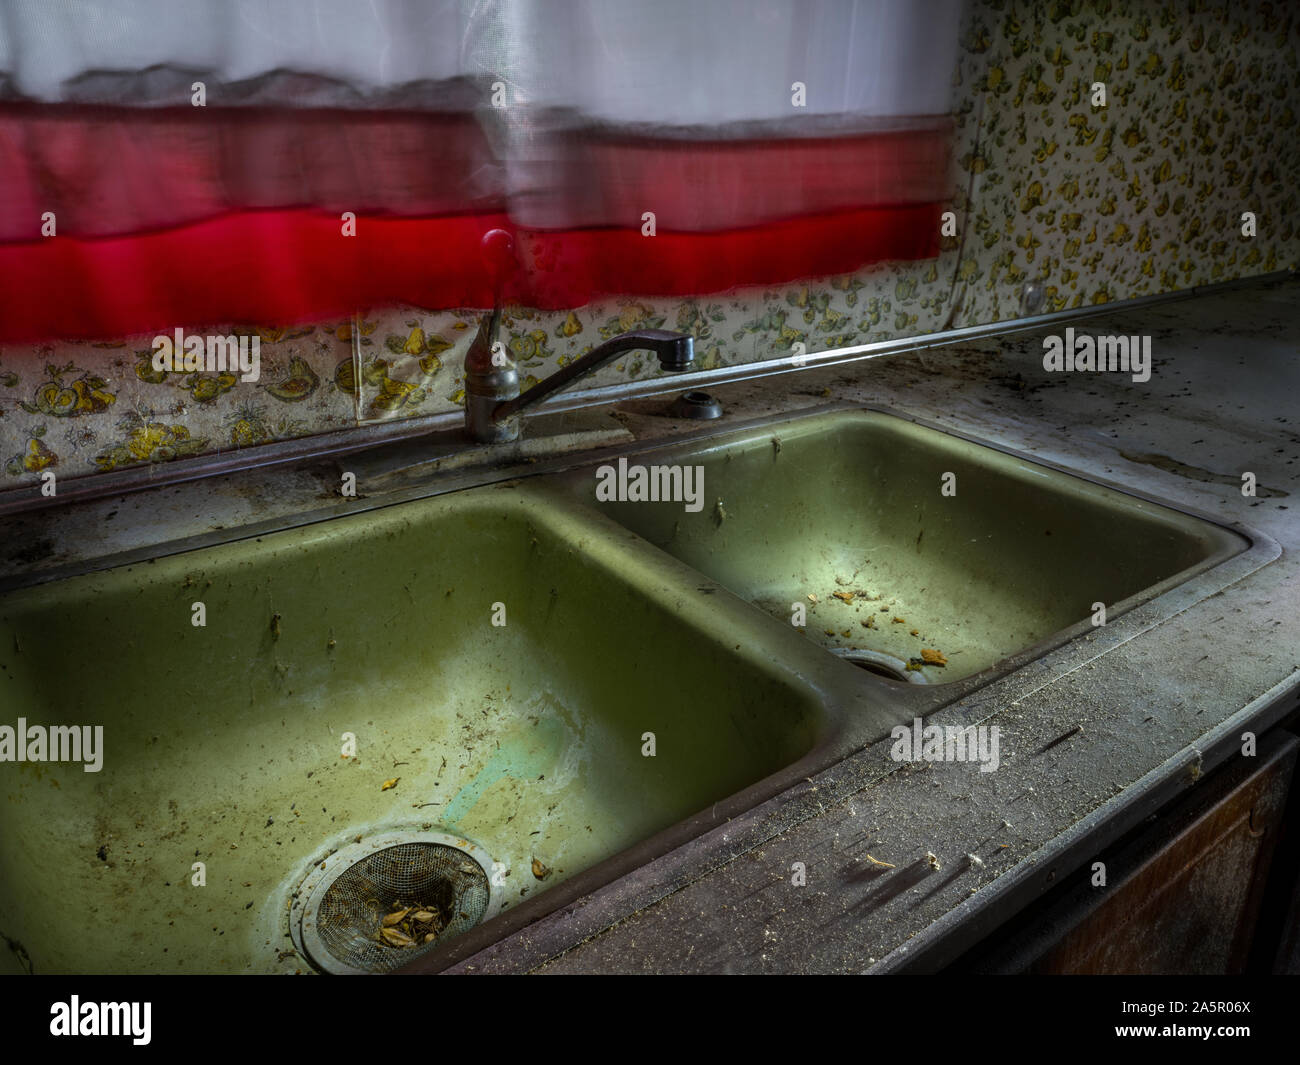 Neglected and abandoned kitchen sink Stock Photo